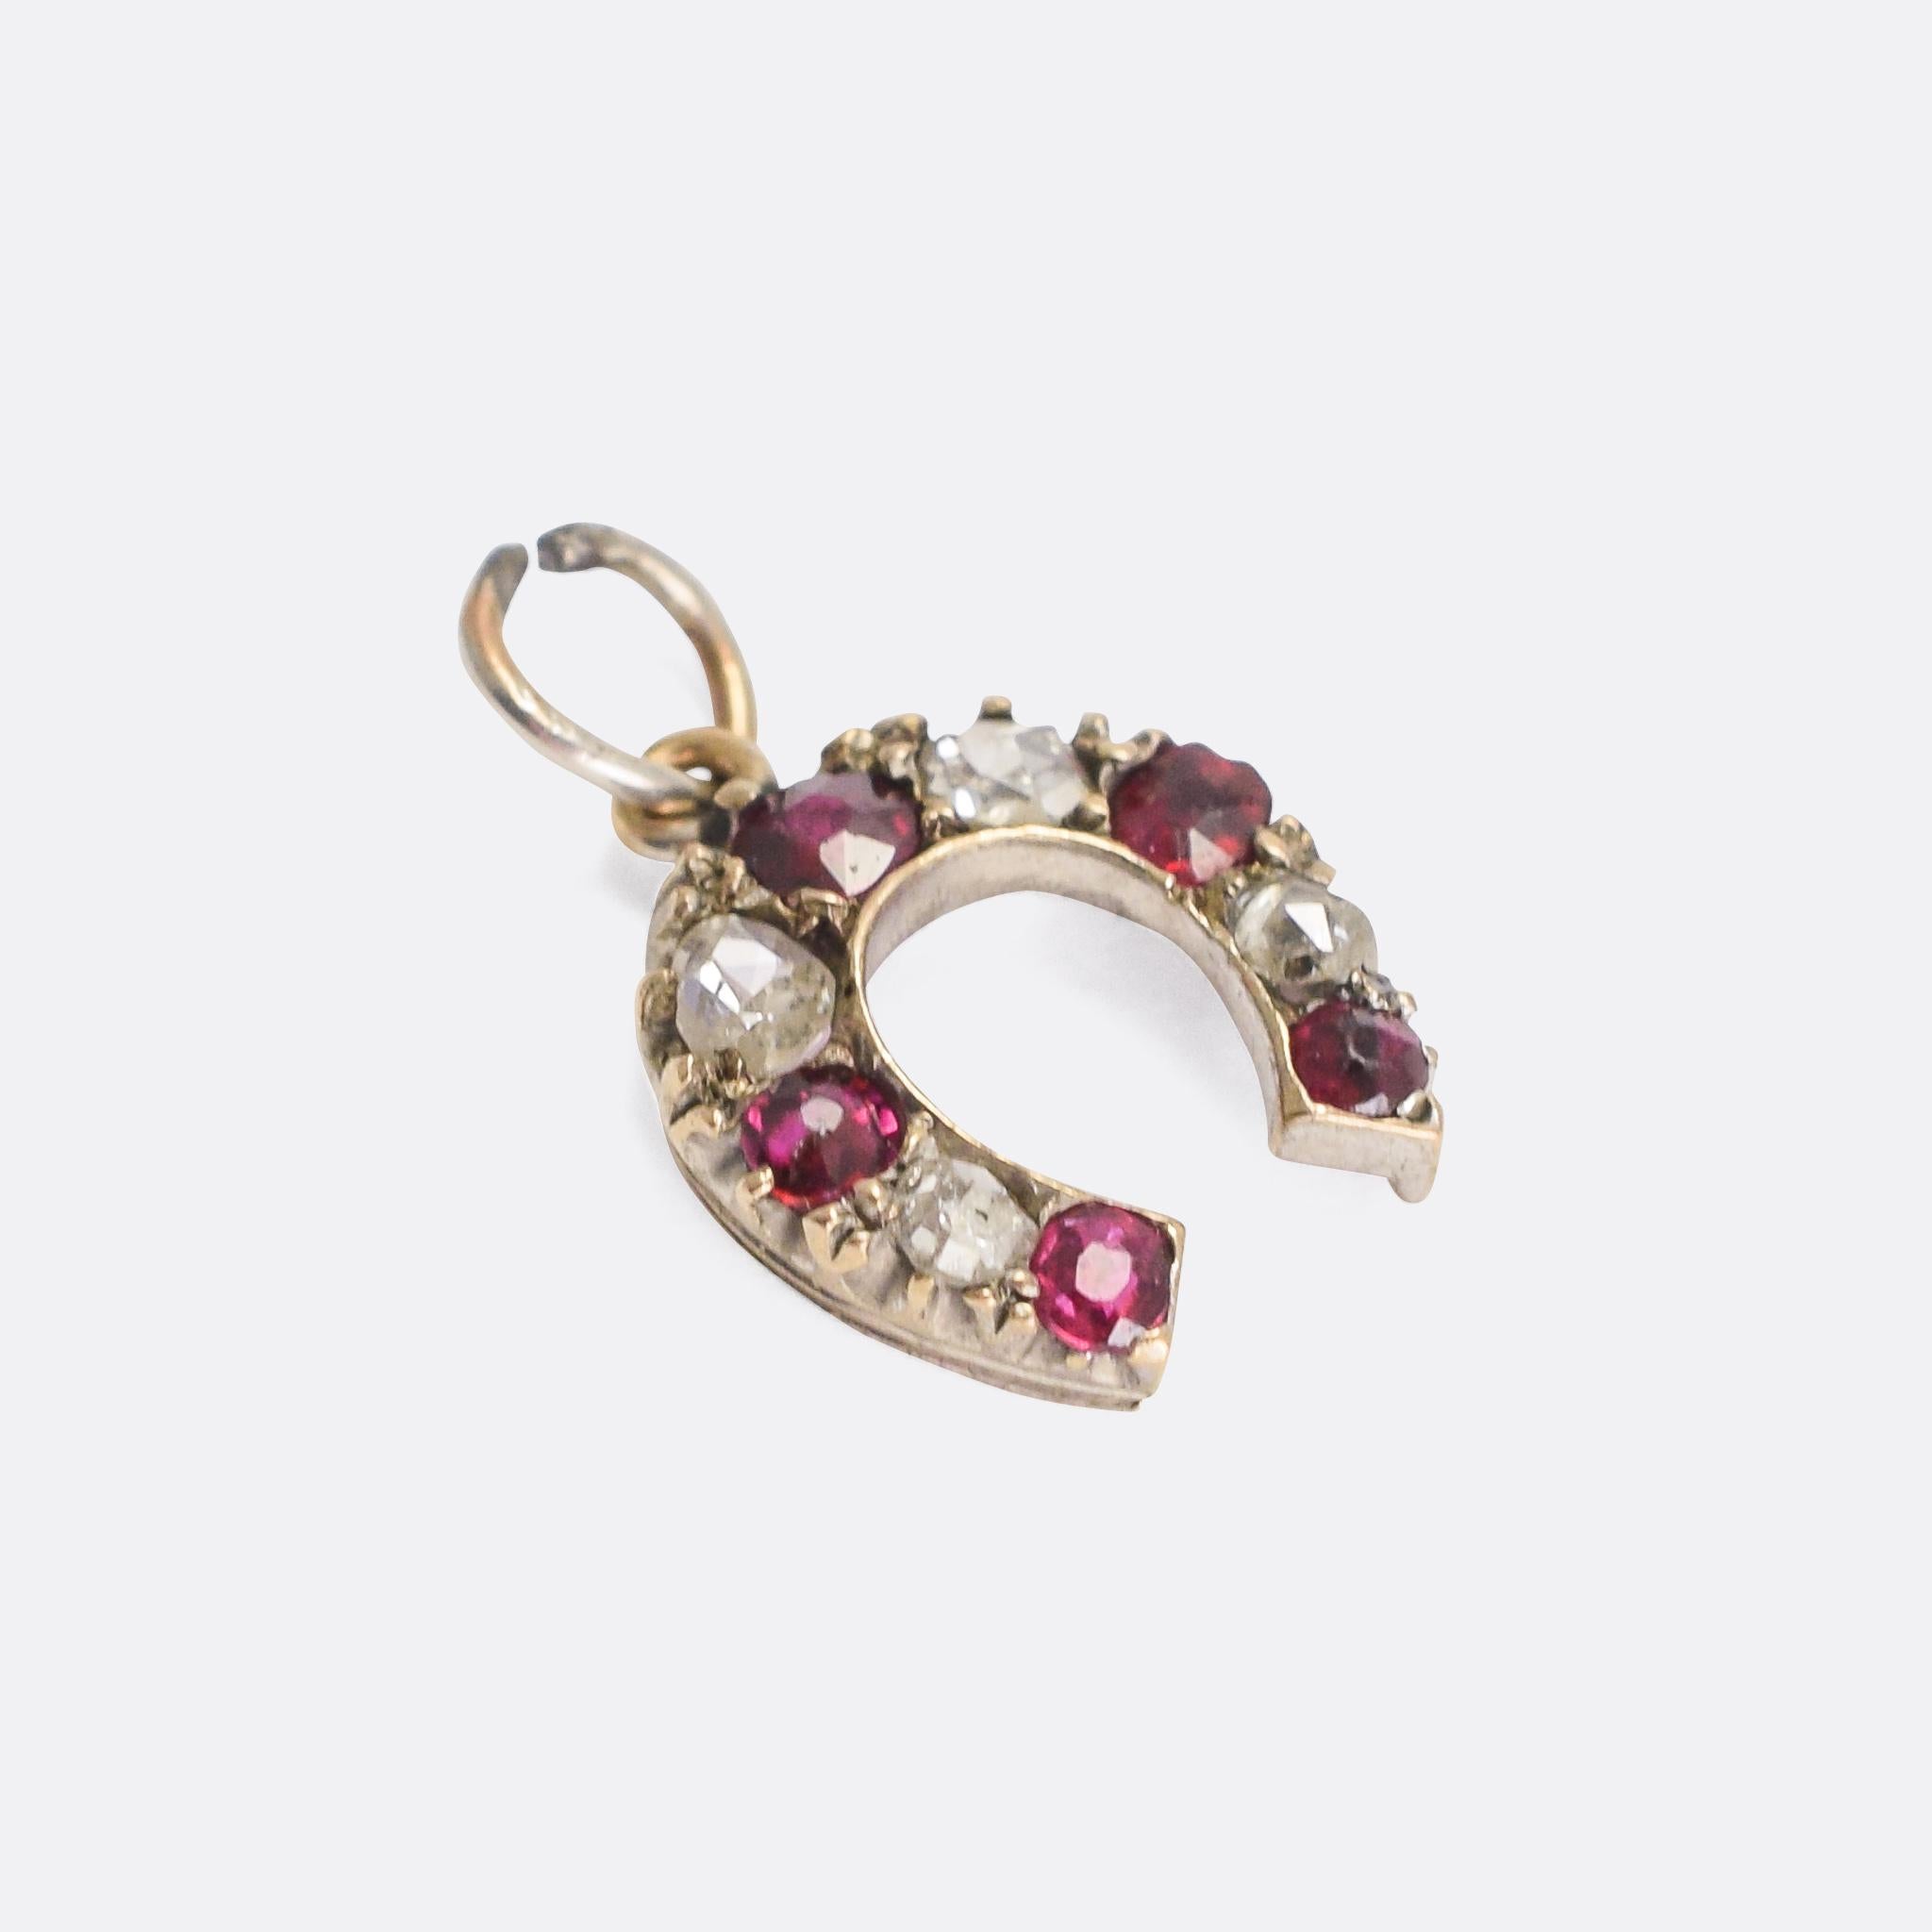 A sweet petite antique horseshoe pendant set with rubies and rose cut diamonds. Dating from the late Victorian era, it's modelled in 9 karat yellow gold with silver settings. A perfect addition to your charm bracelet, or for wear as a single